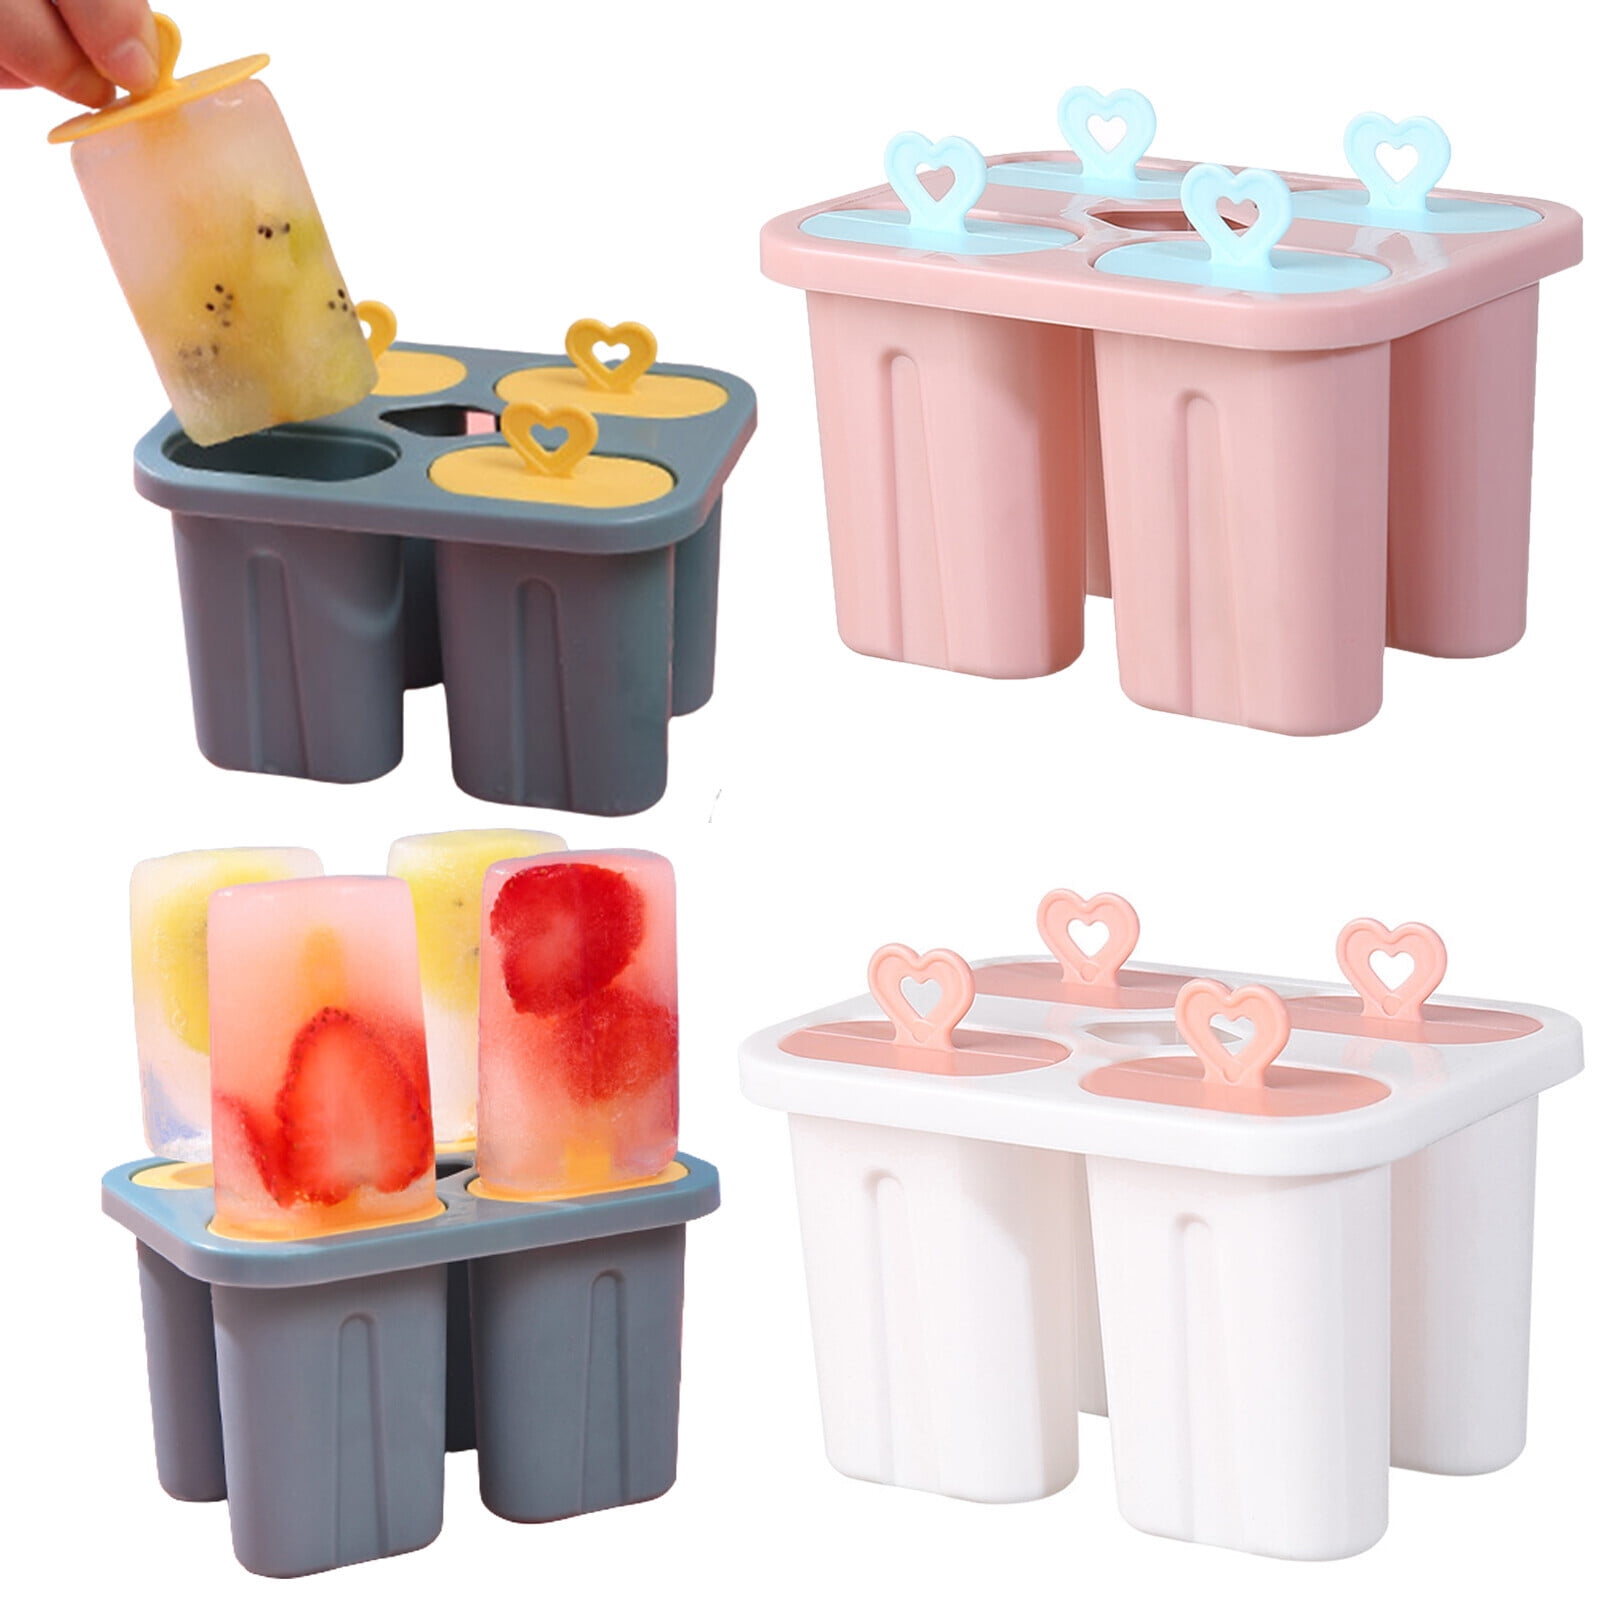 Frehsky kitchen gadgets Popsicle Mold Set 4 Pieces Homemade Silicone Popsicle  Maker Kid Easy Release Ice Cream Molds Reusable DIY Ice Molds 